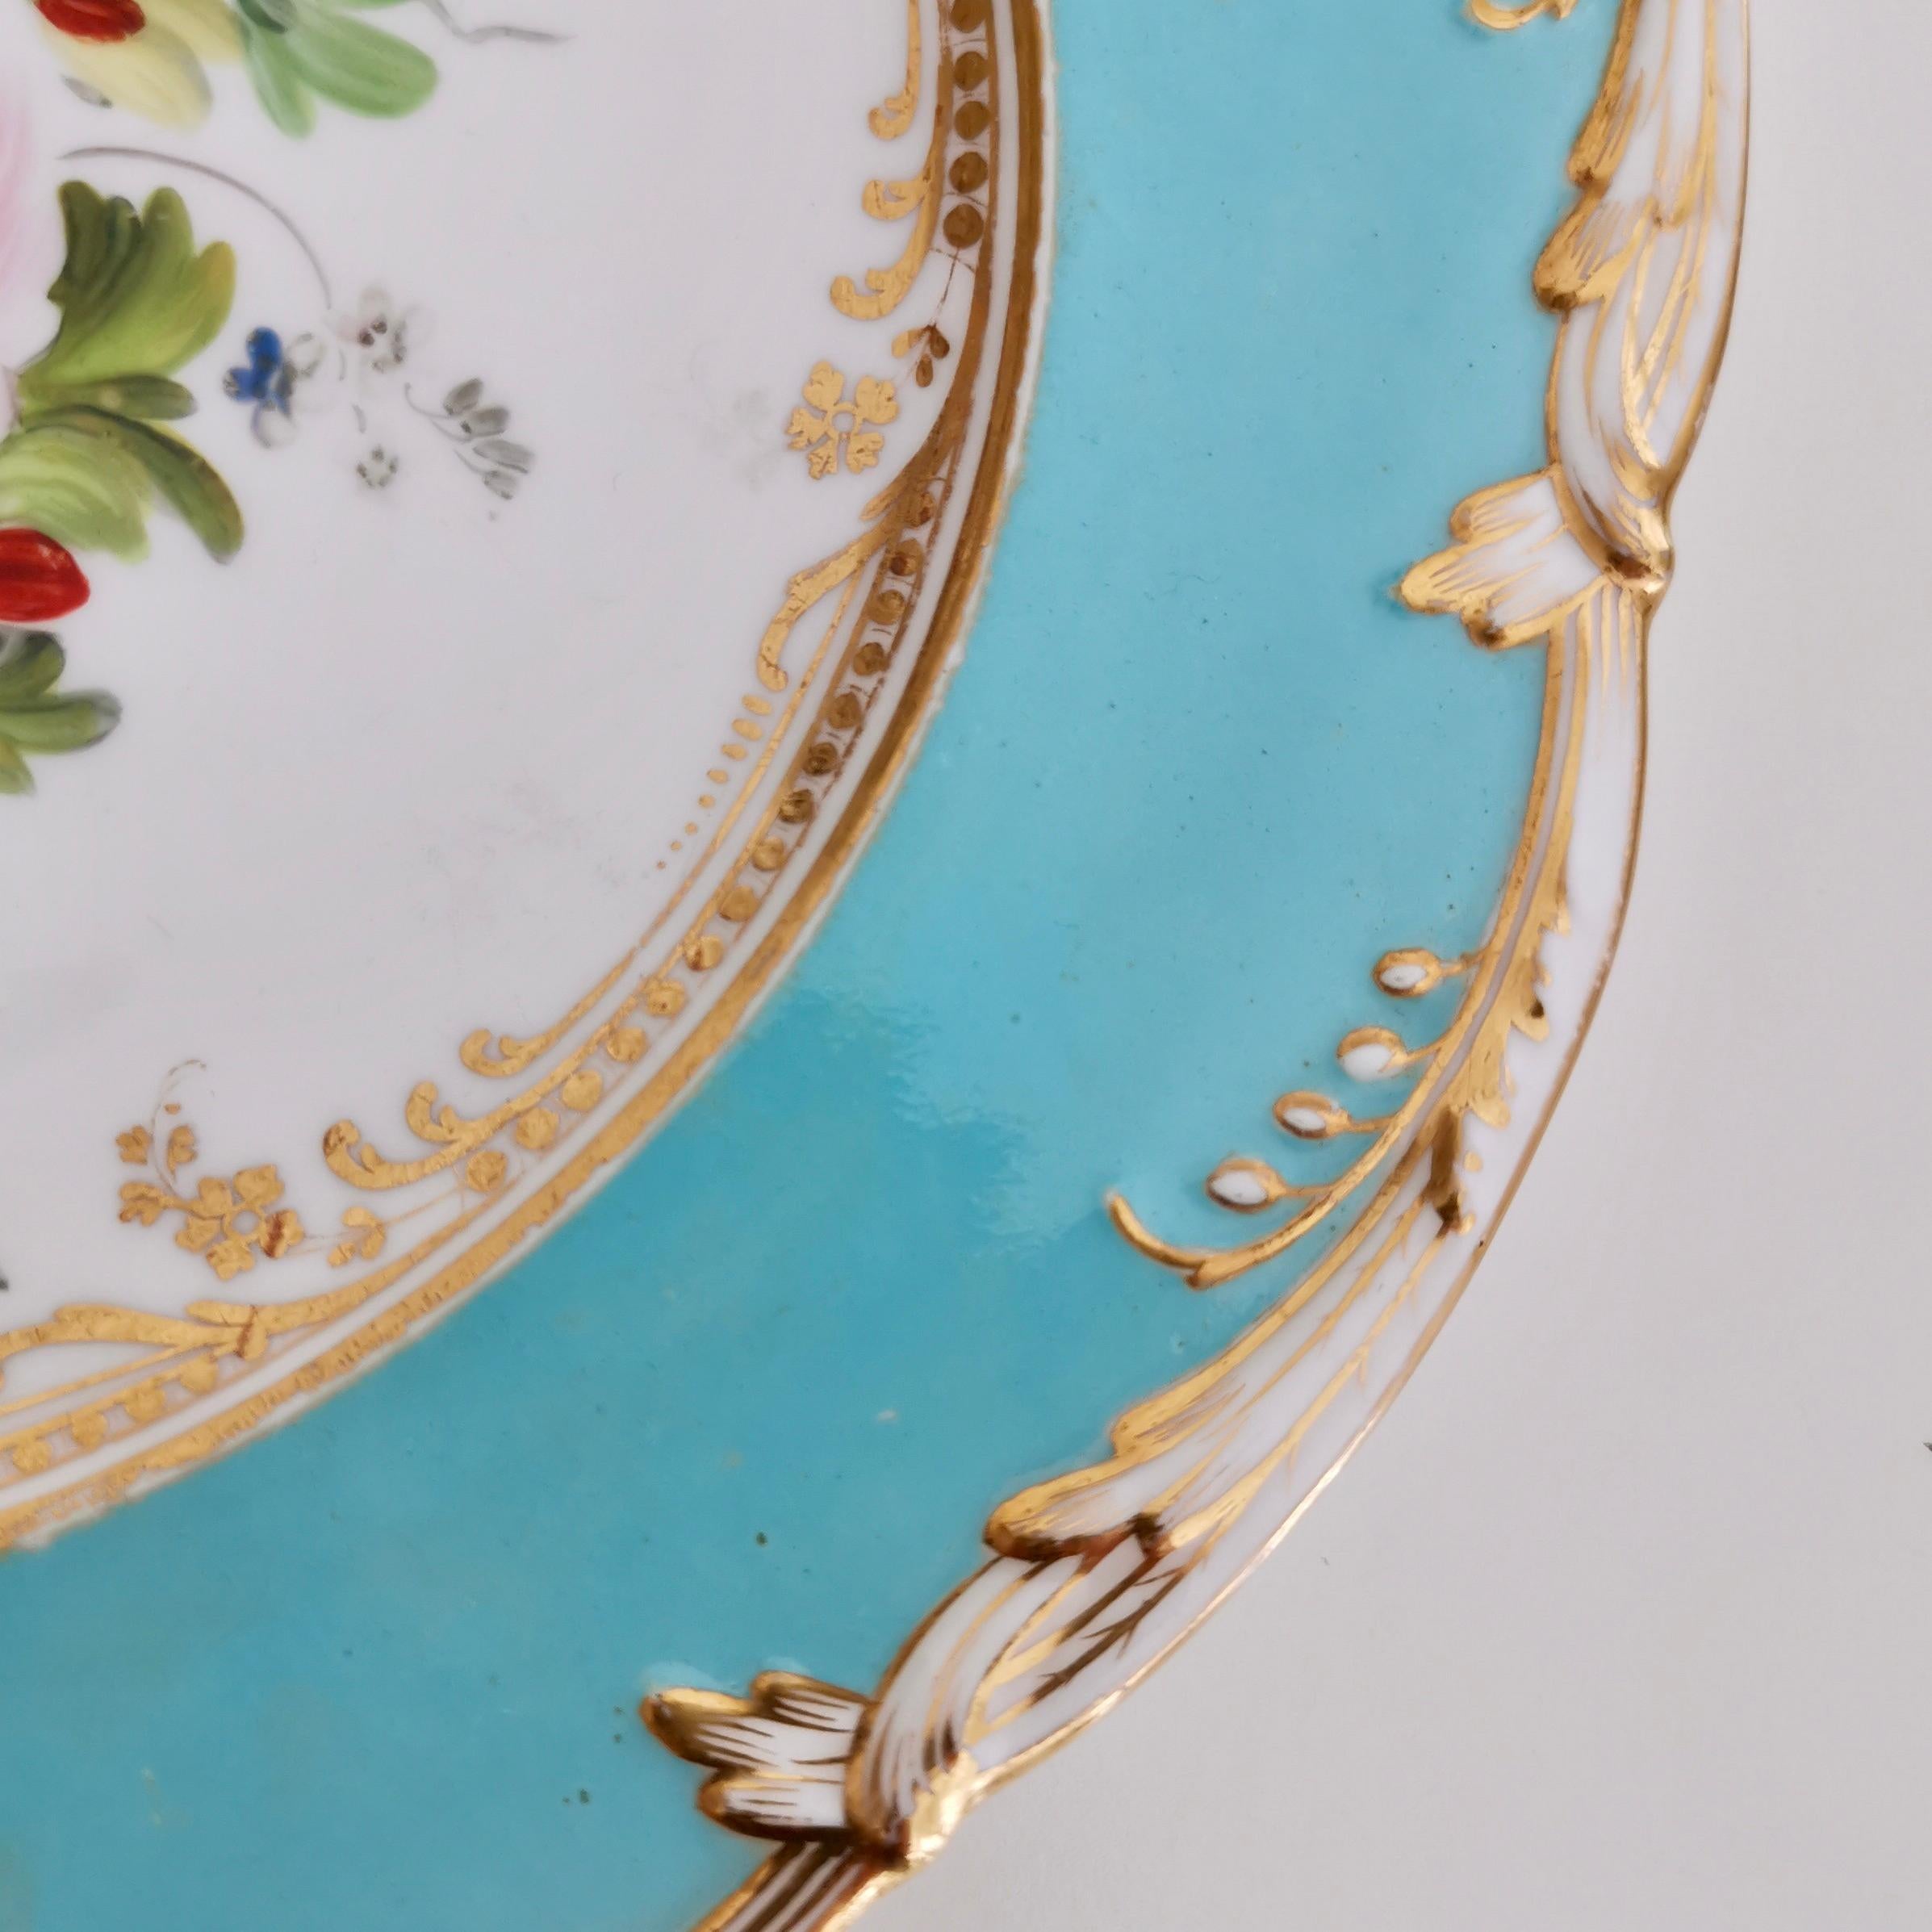 Hand-Painted Coalport Porcelain Plate, Sky Blue with Flowers by Thomas Dixon, 1845-1850 '2'